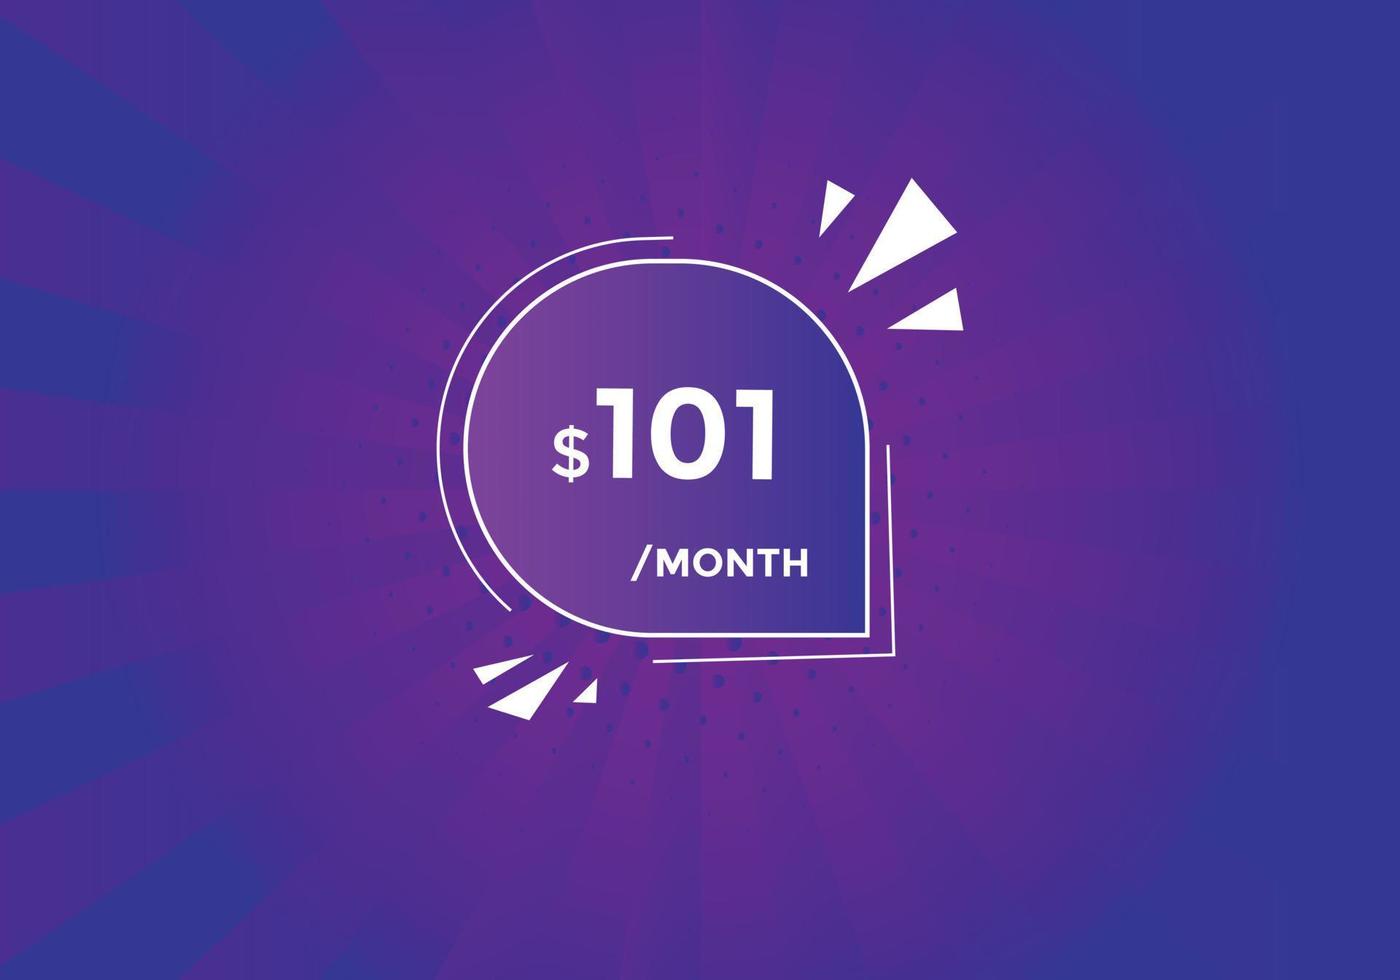 101 USD Dollar Month sale promotion Banner. Special offer, 101 dollar month price tag, shop now button. Business or shopping promotion marketing concept vector